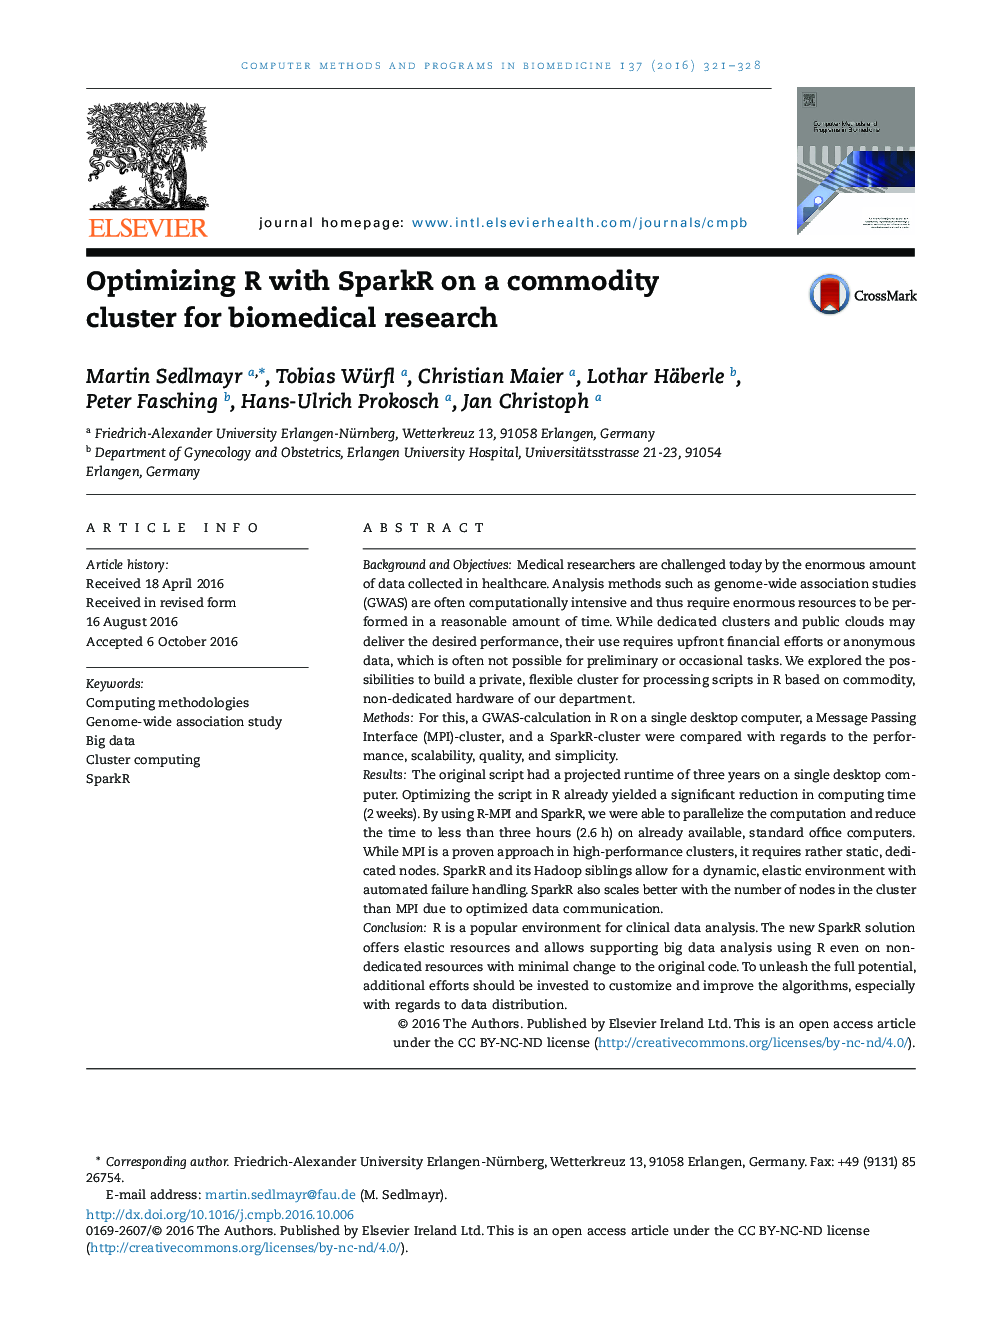 Optimizing R with SparkR on a commodity cluster for biomedical research